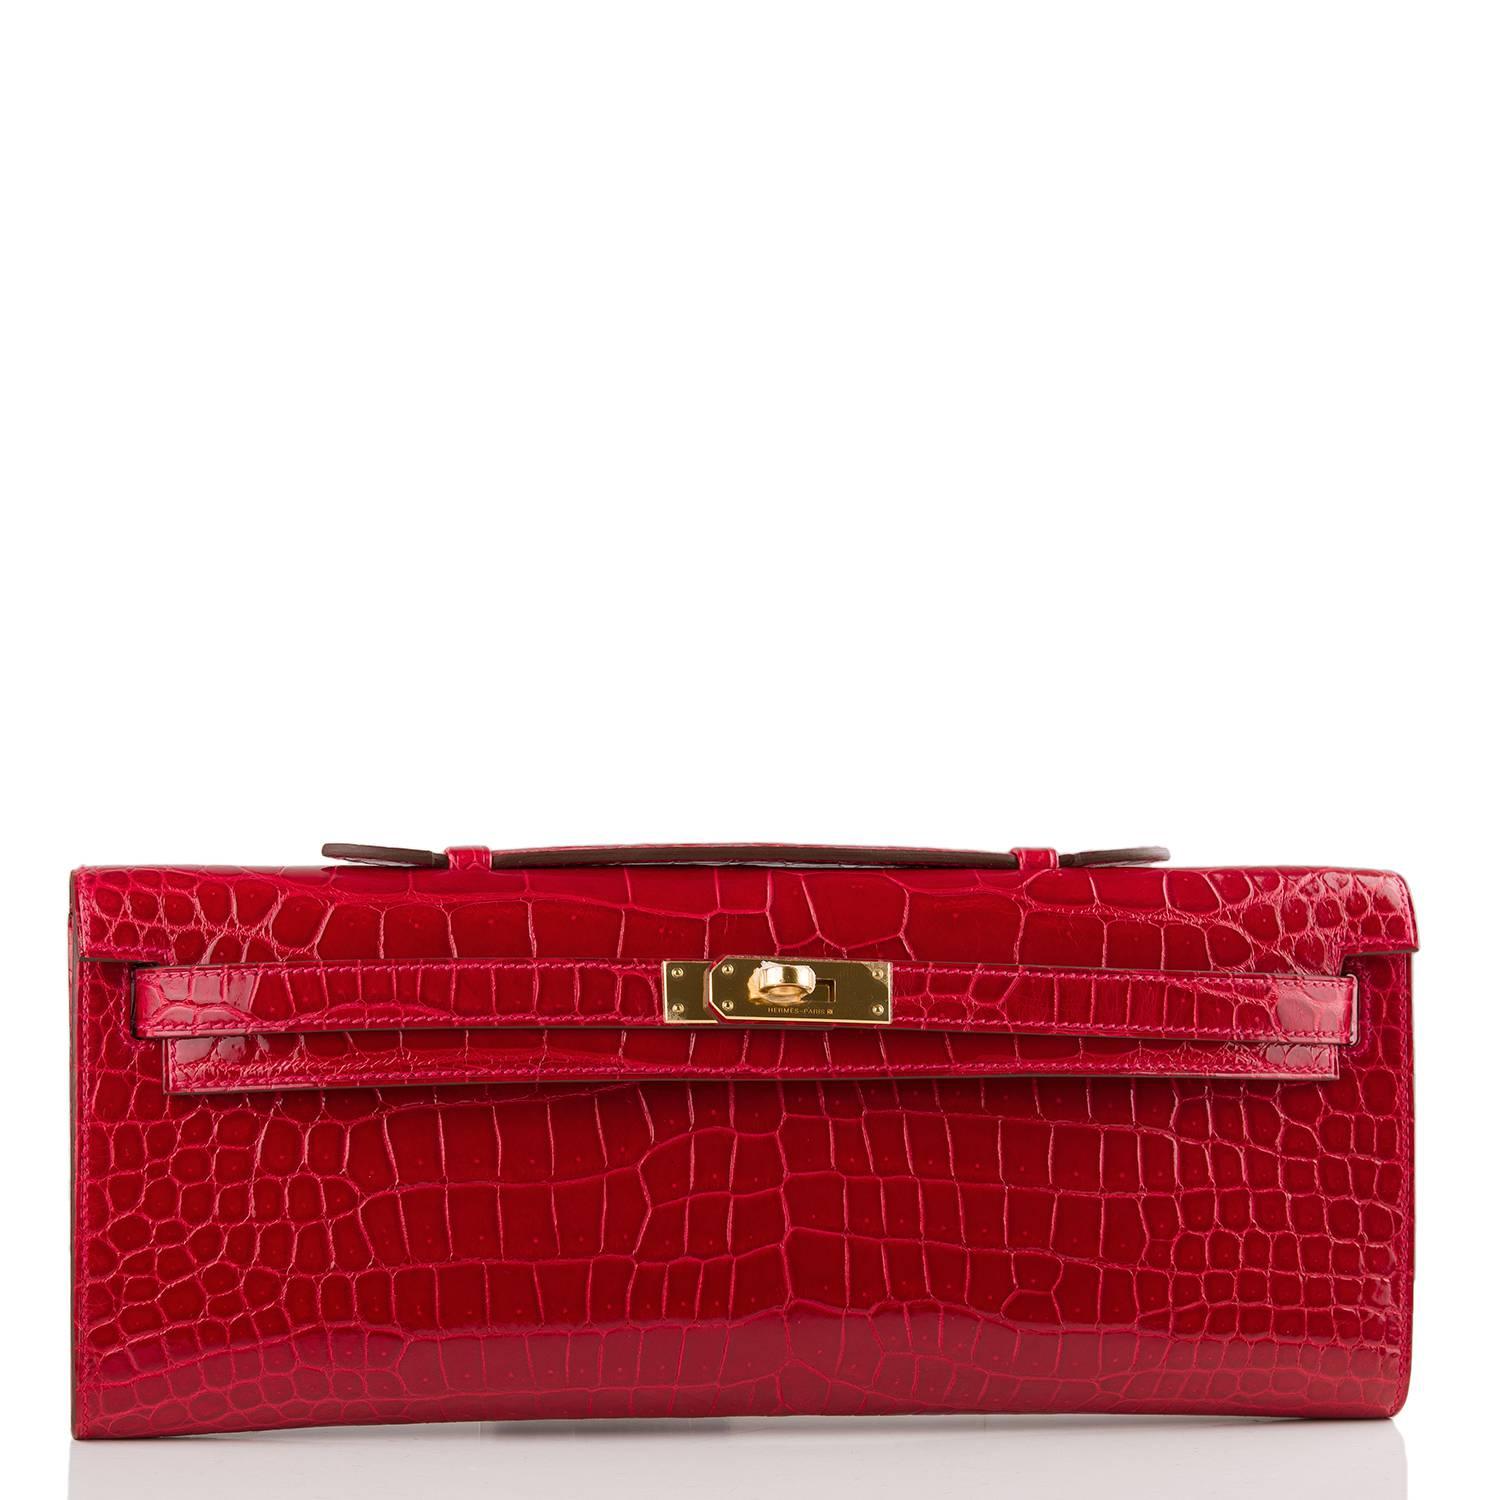 Hermes rare Braise Kelly Cut of shiny porosus crocodile with gold hardware.

This exotic bright red Kelly Cut has tonal stitching, front straps with a toggle closure and a top flat handle.

The interior is lined with Braise chevre leather and has an